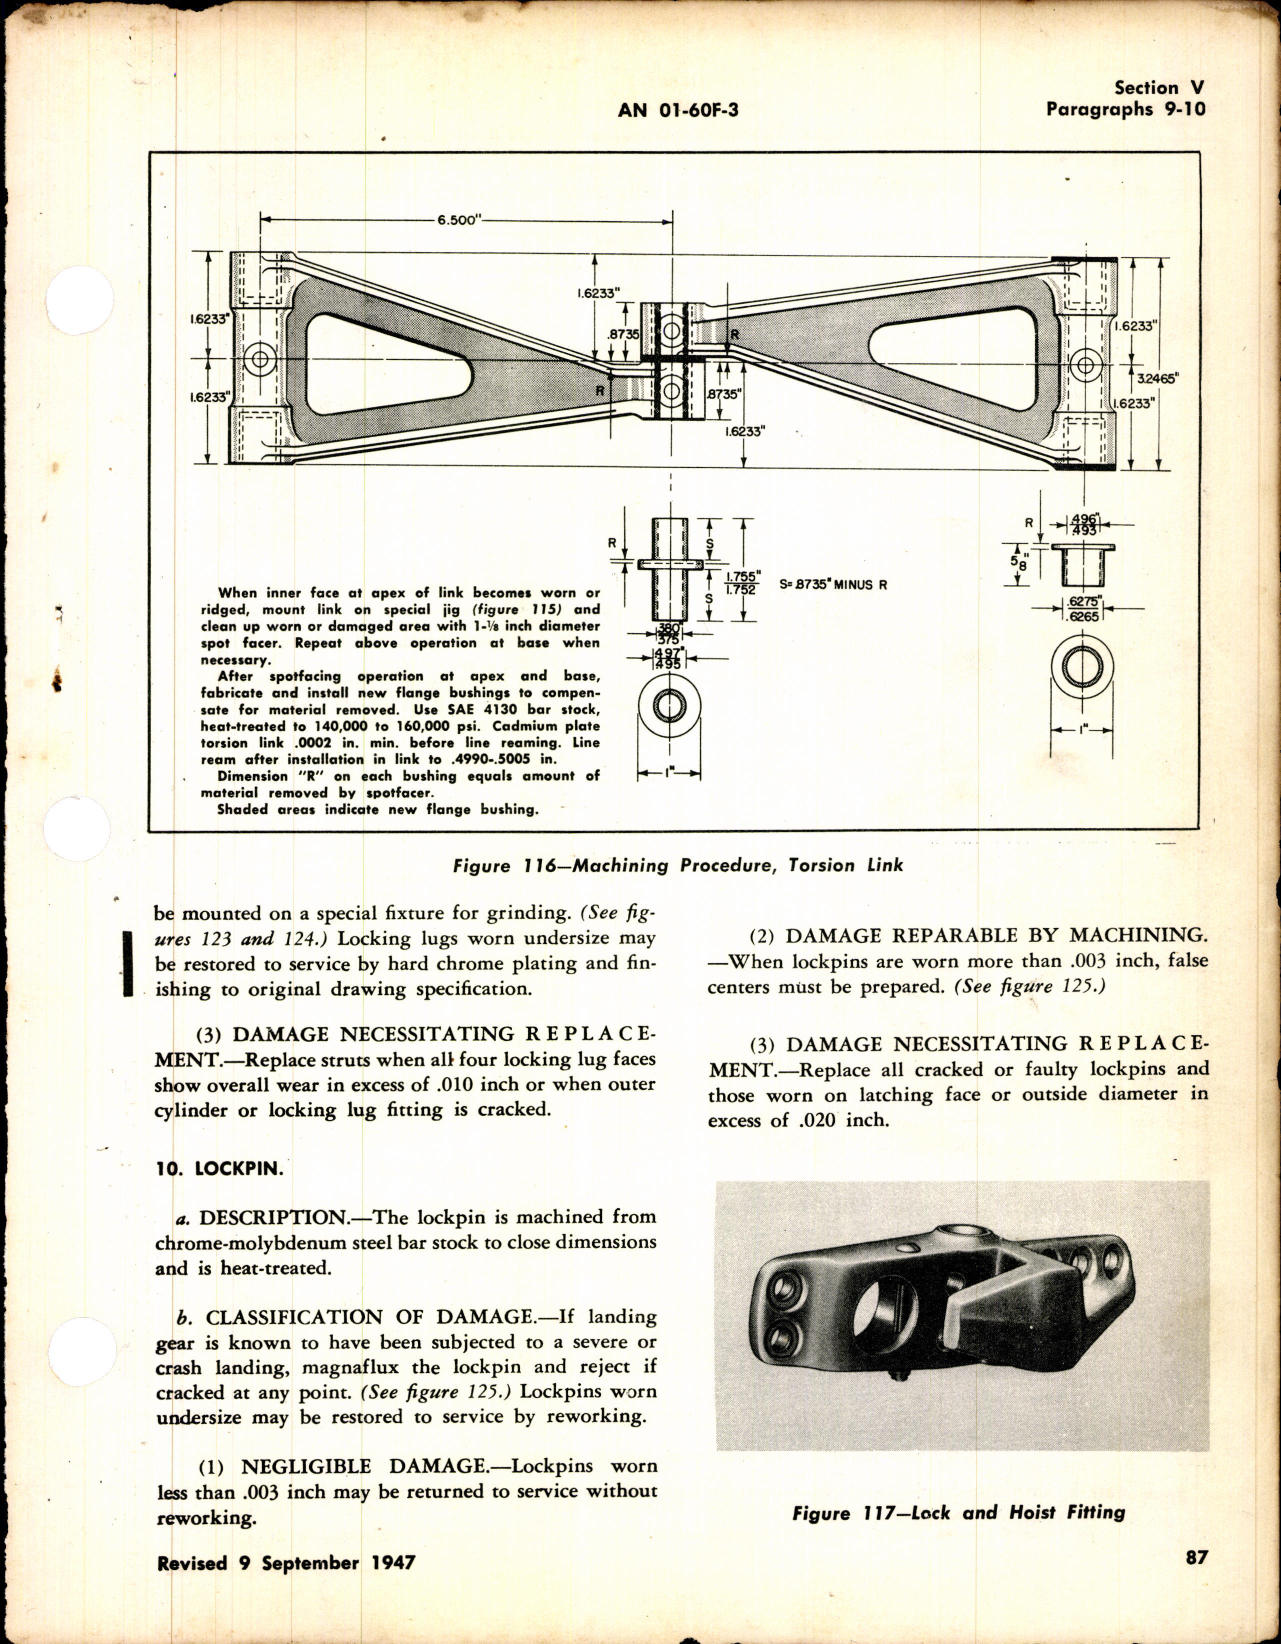 Sample page 3 from AirCorps Library document: Structural Repair Instructions for T-6 (AT-6)